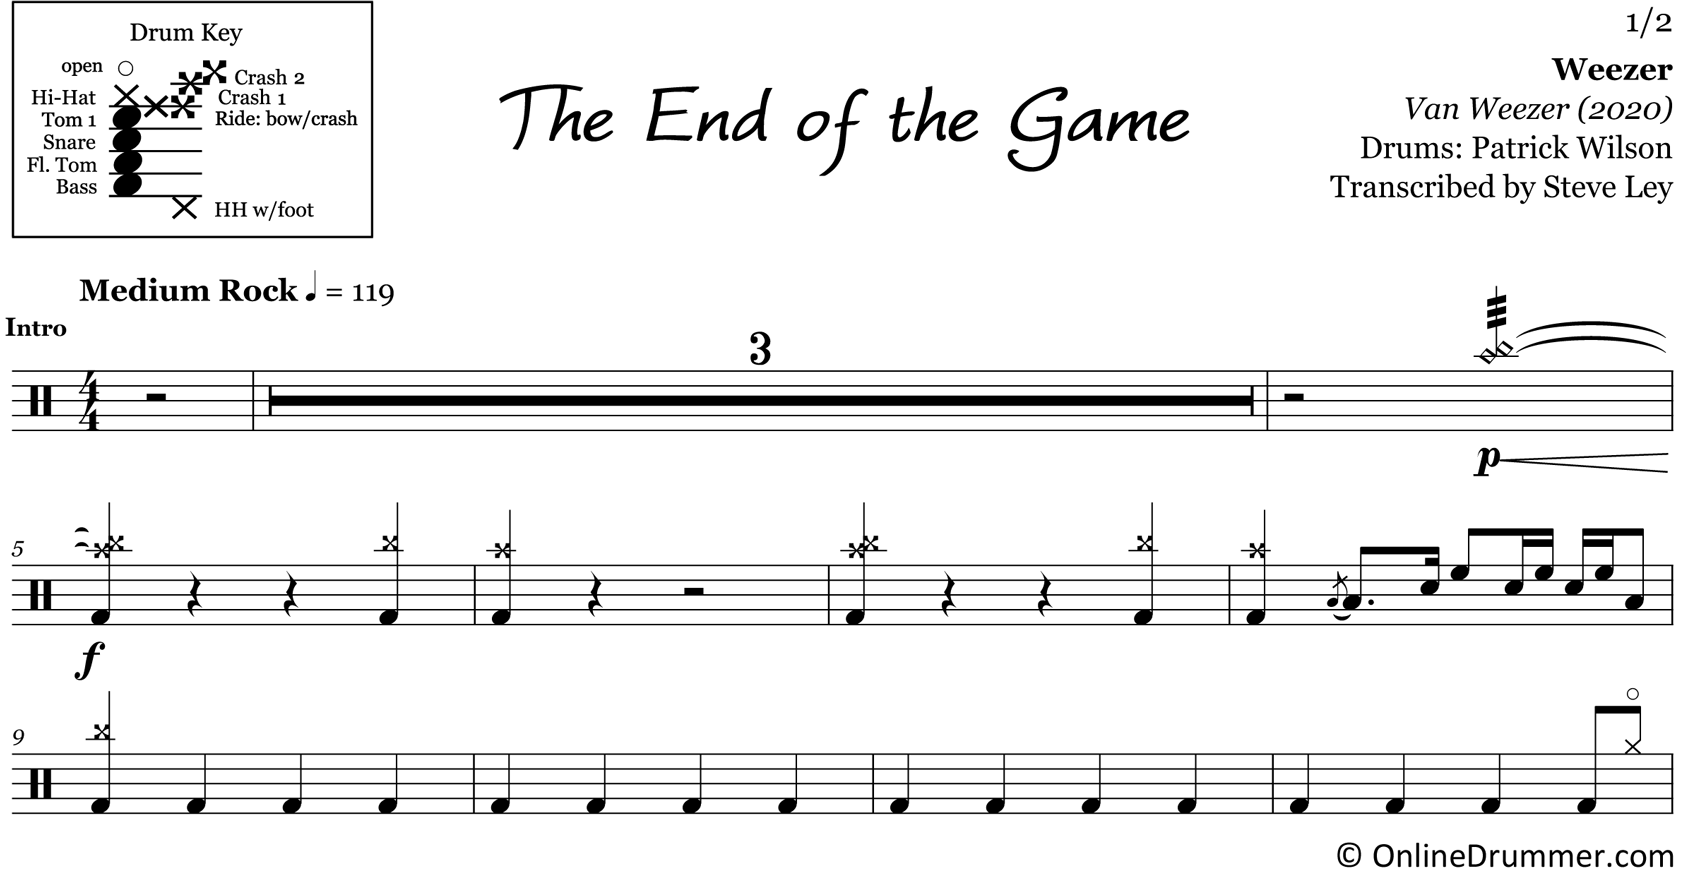 The End of the Game - Weezer - Drum Sheet Music